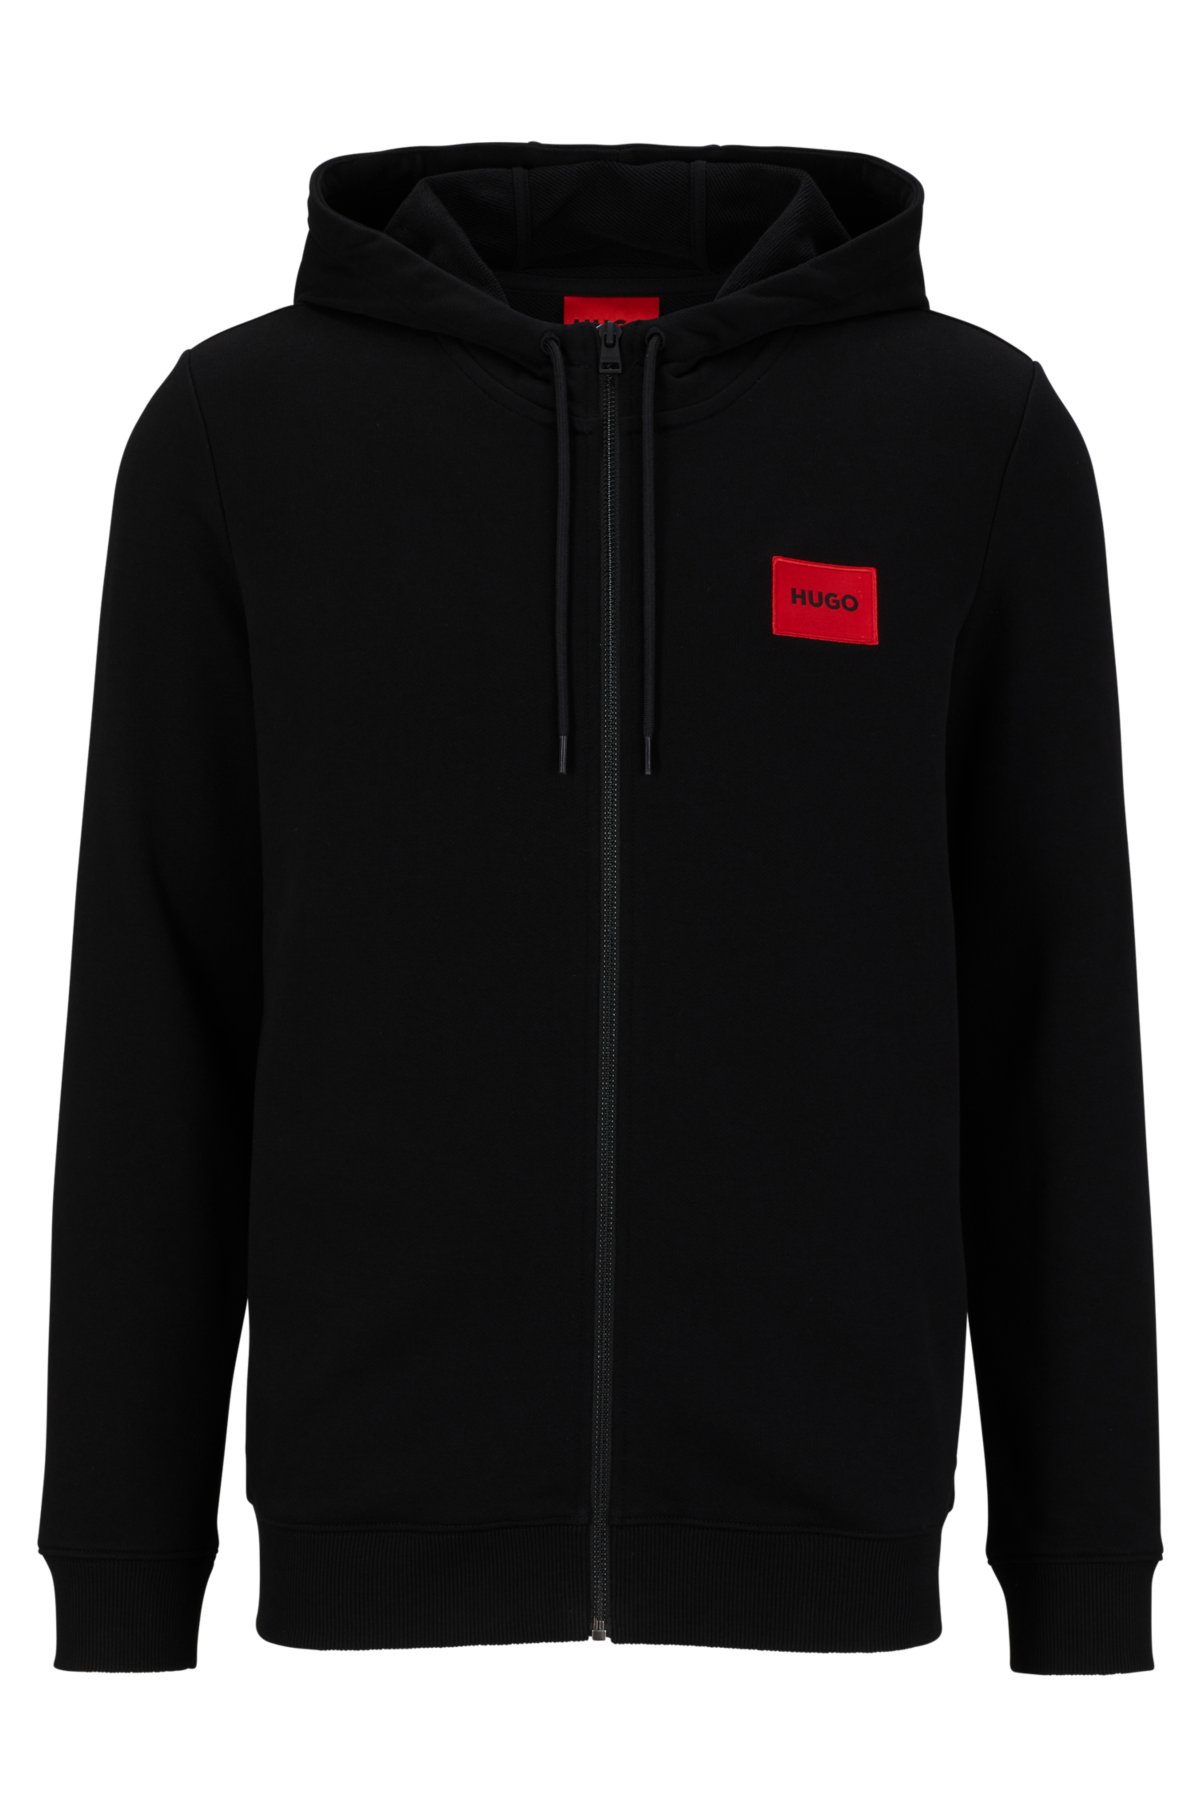 HUGO - French label with Regular-fit terry logo in hoodie